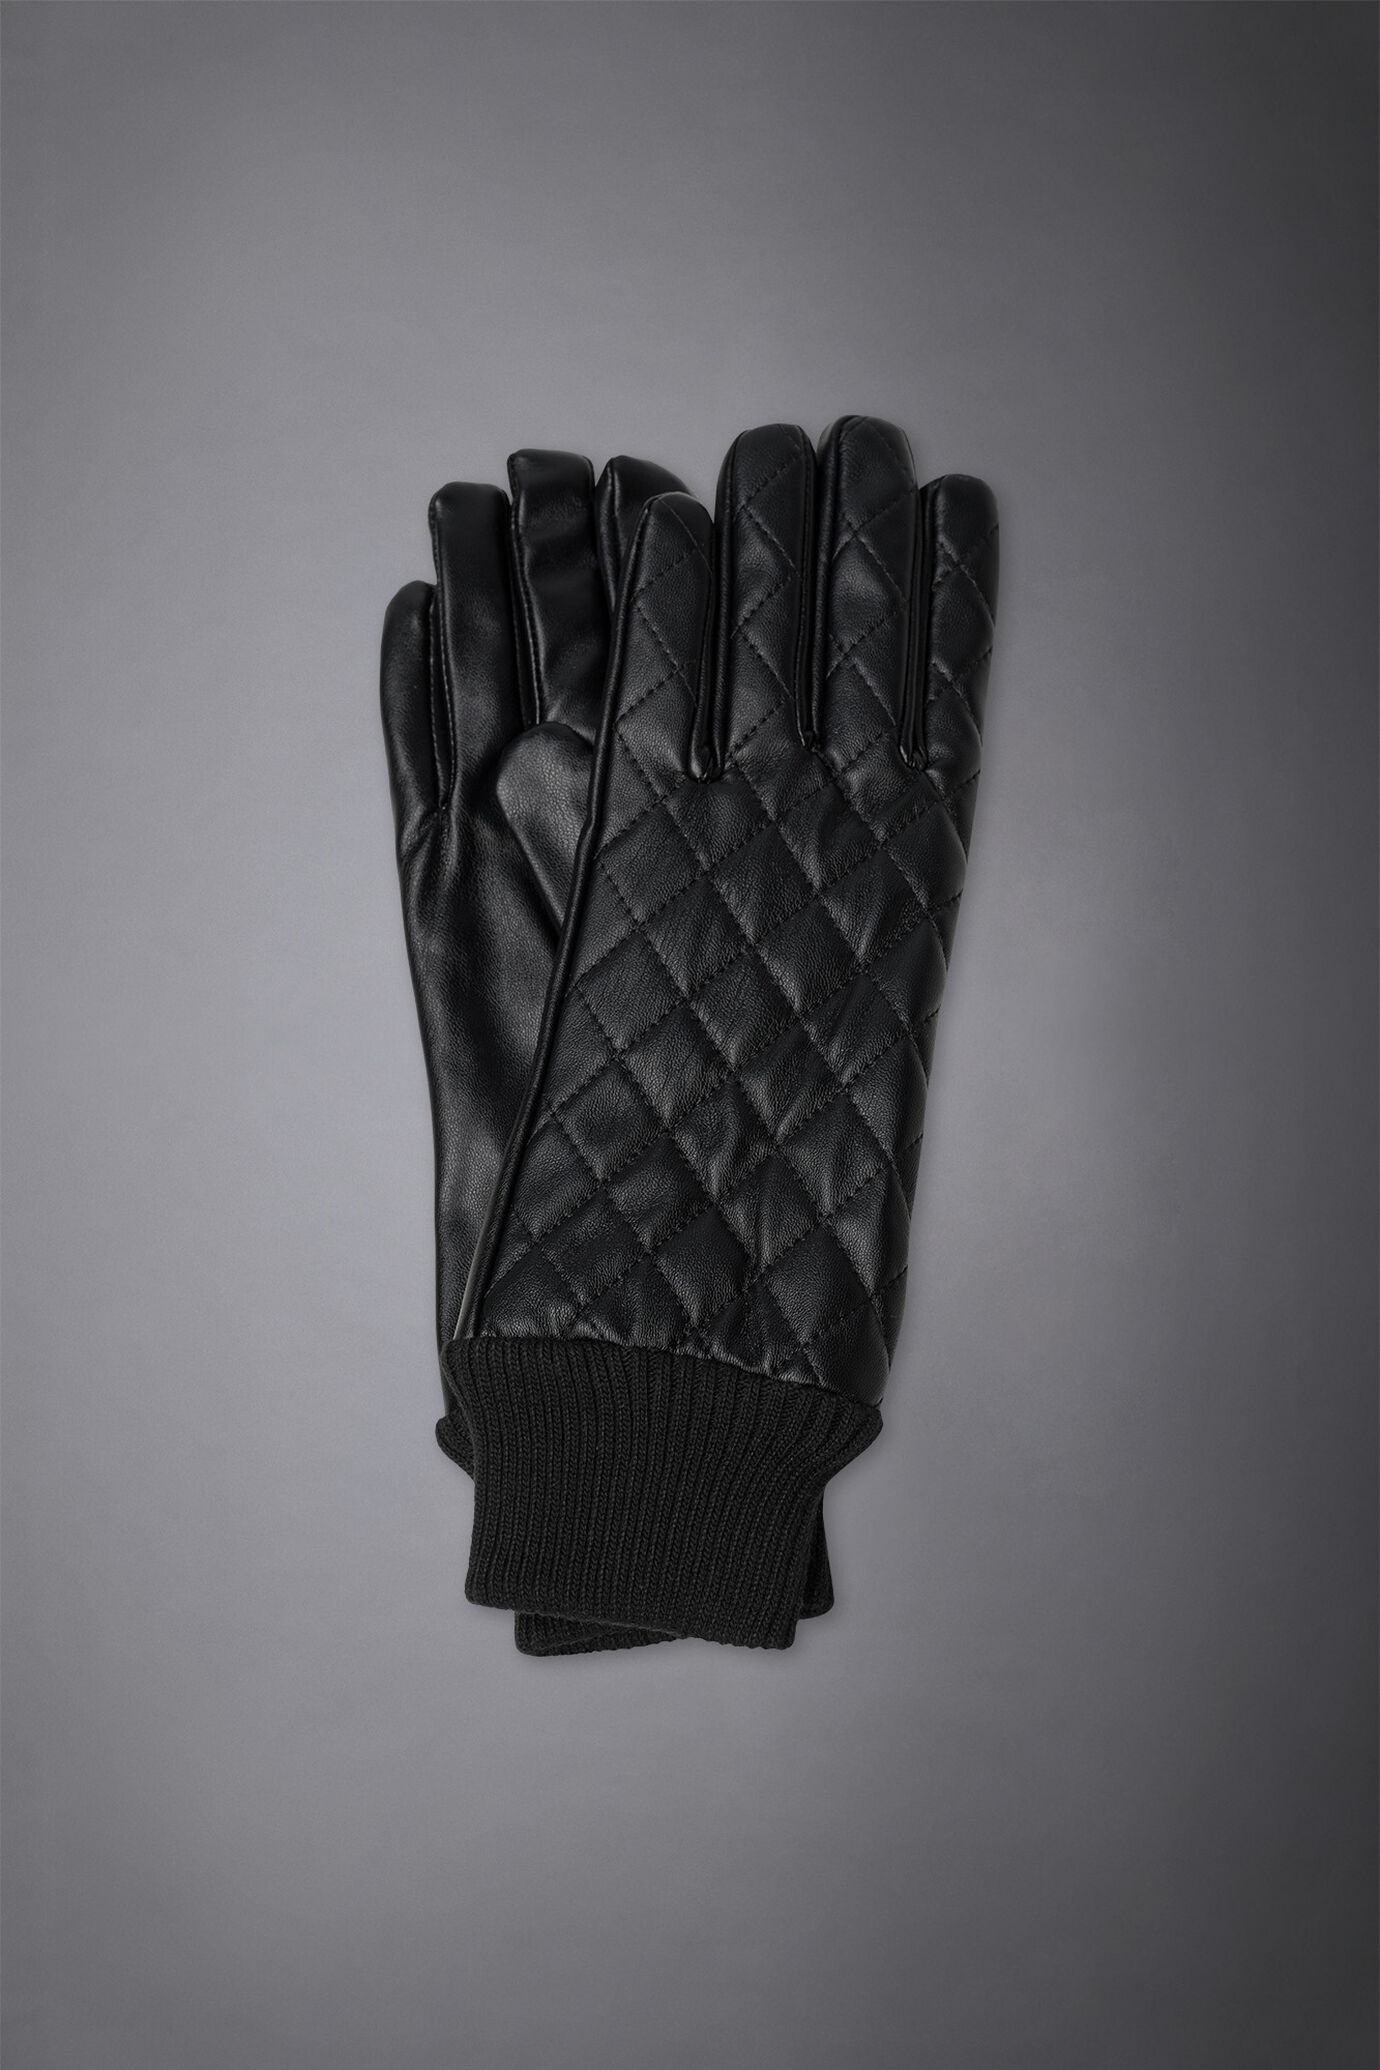 Padded gloves with knitted cuffs